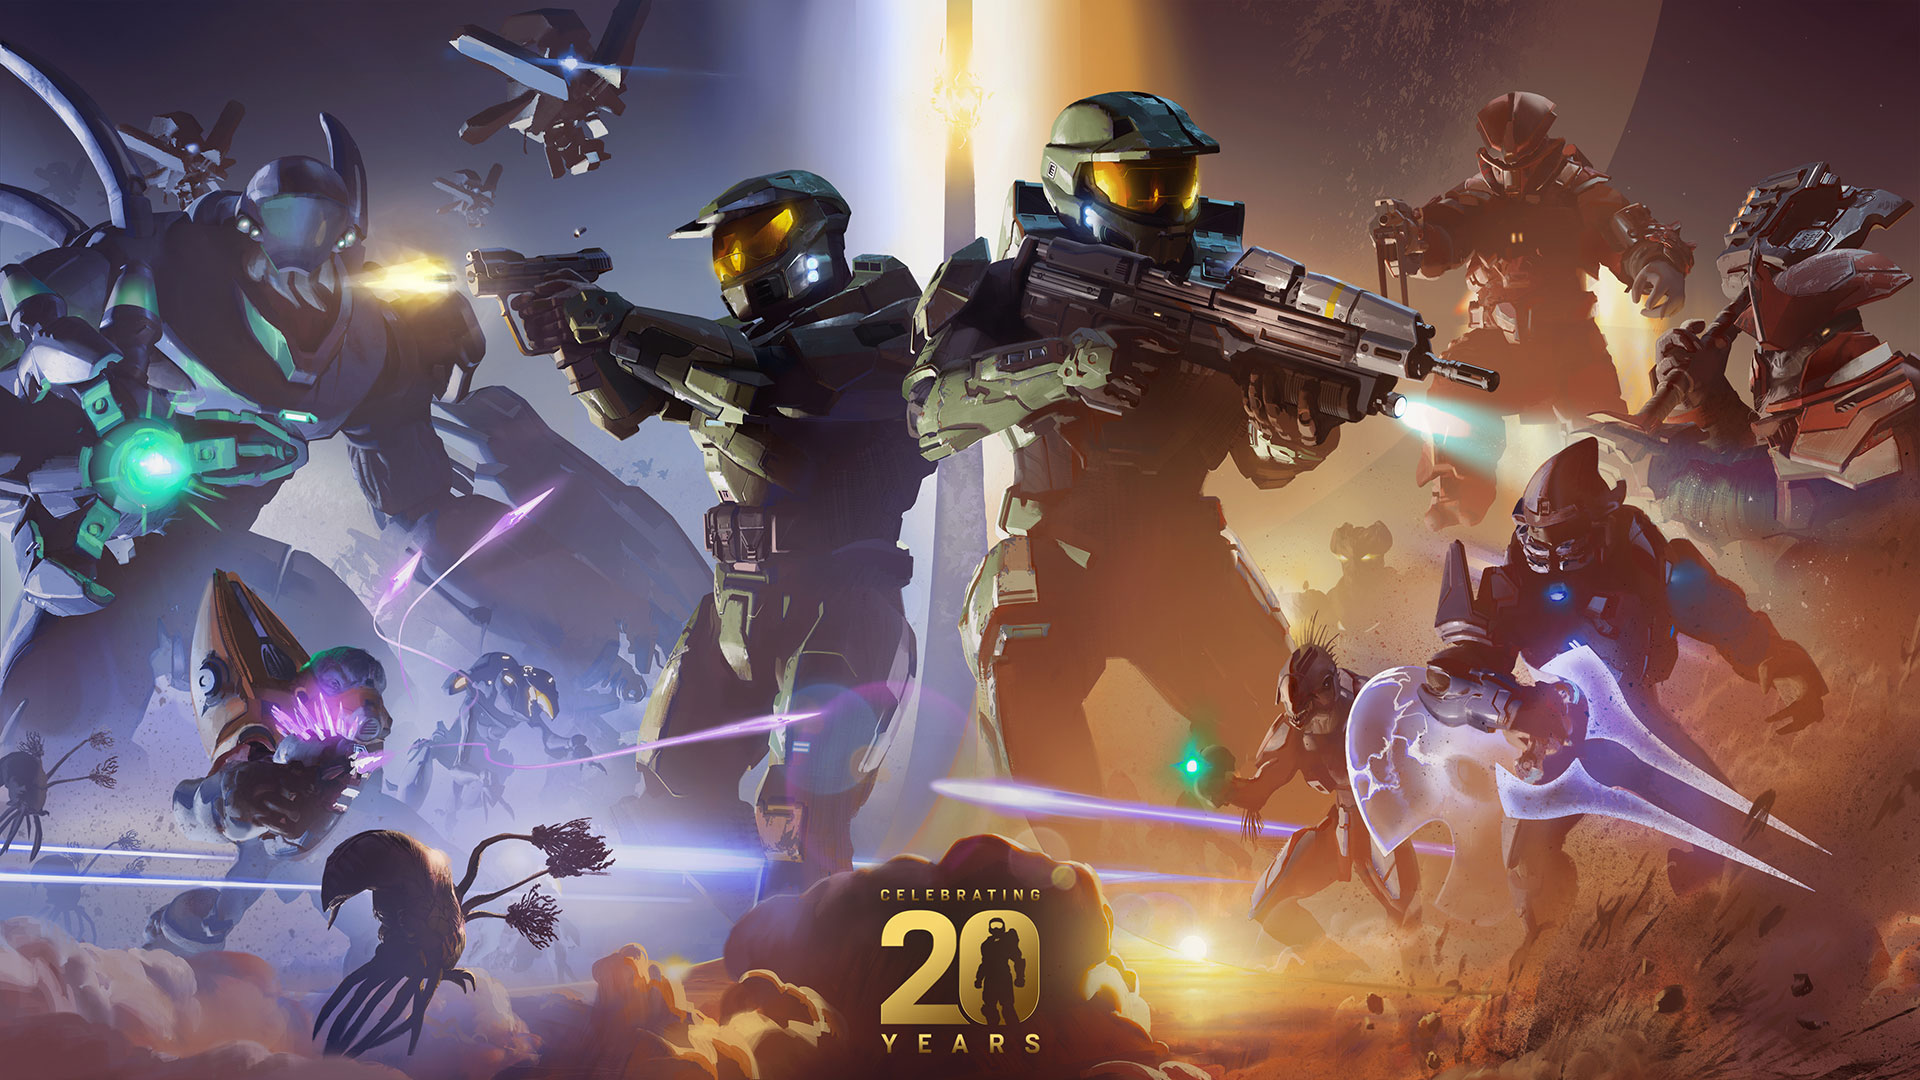 20 years of Halo commemorative painting